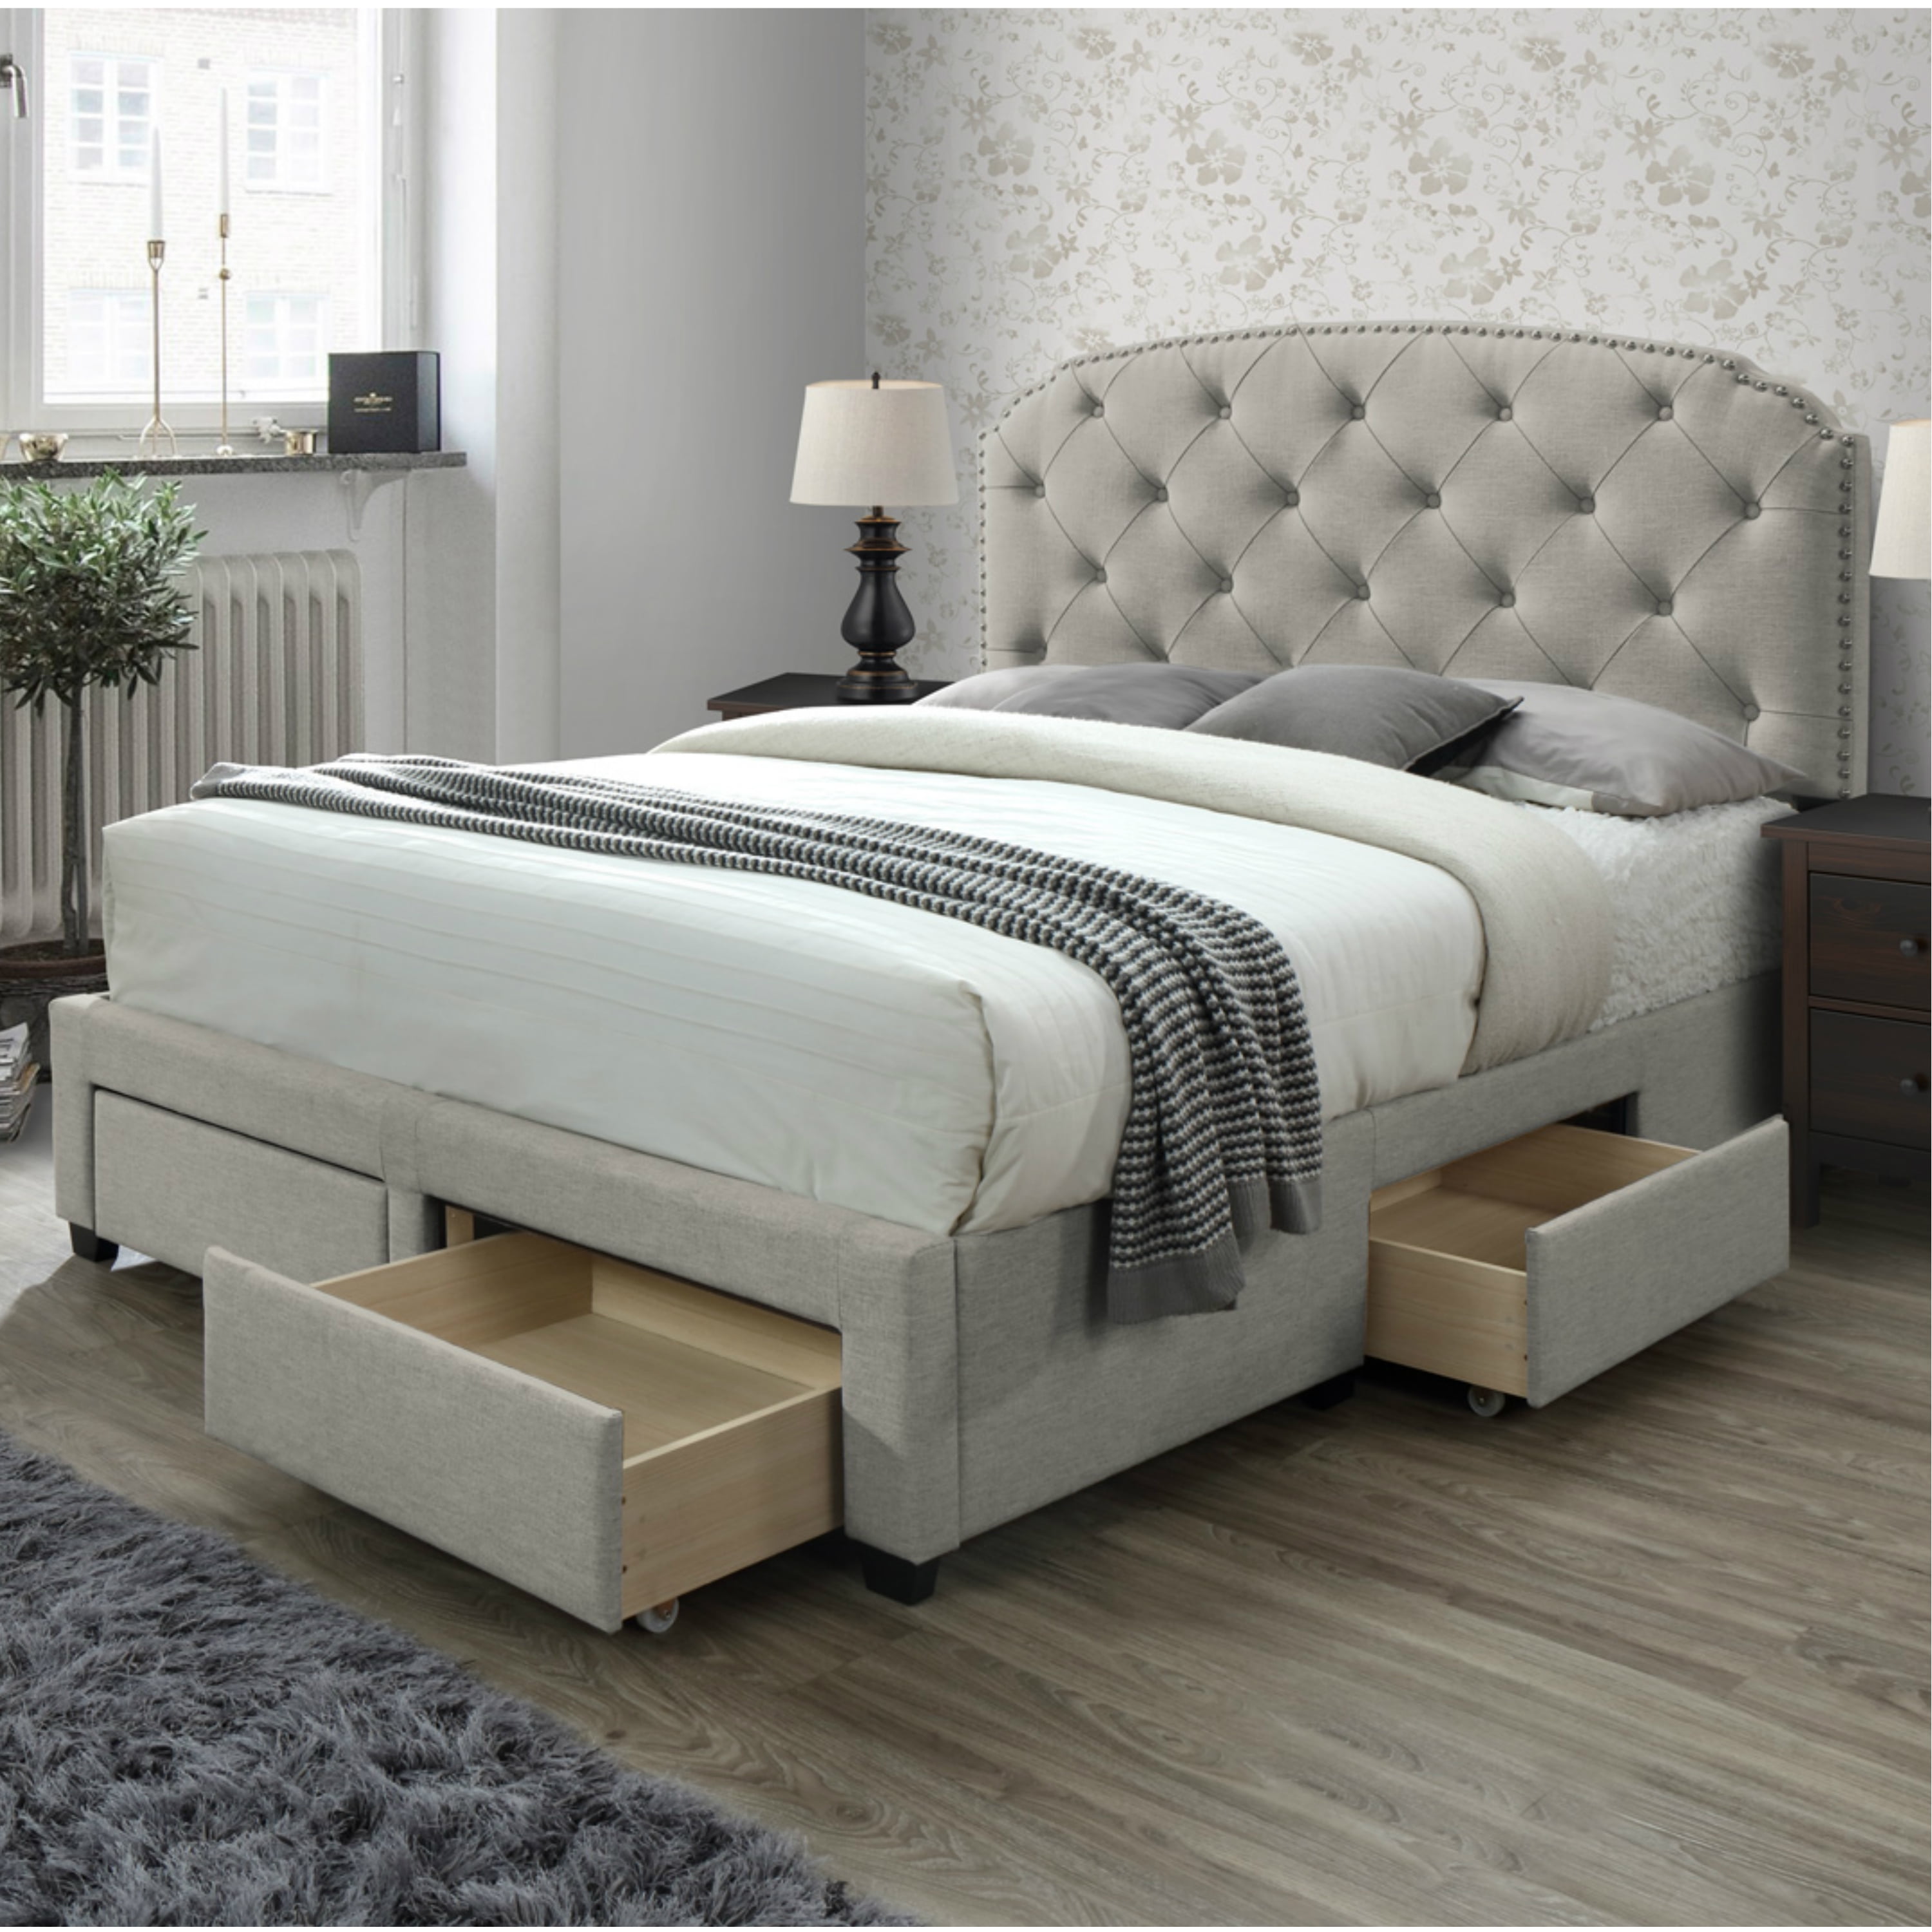 Dg Casa Argo Tufted Upholstered Panel, White King Size Bed With Storage Drawers